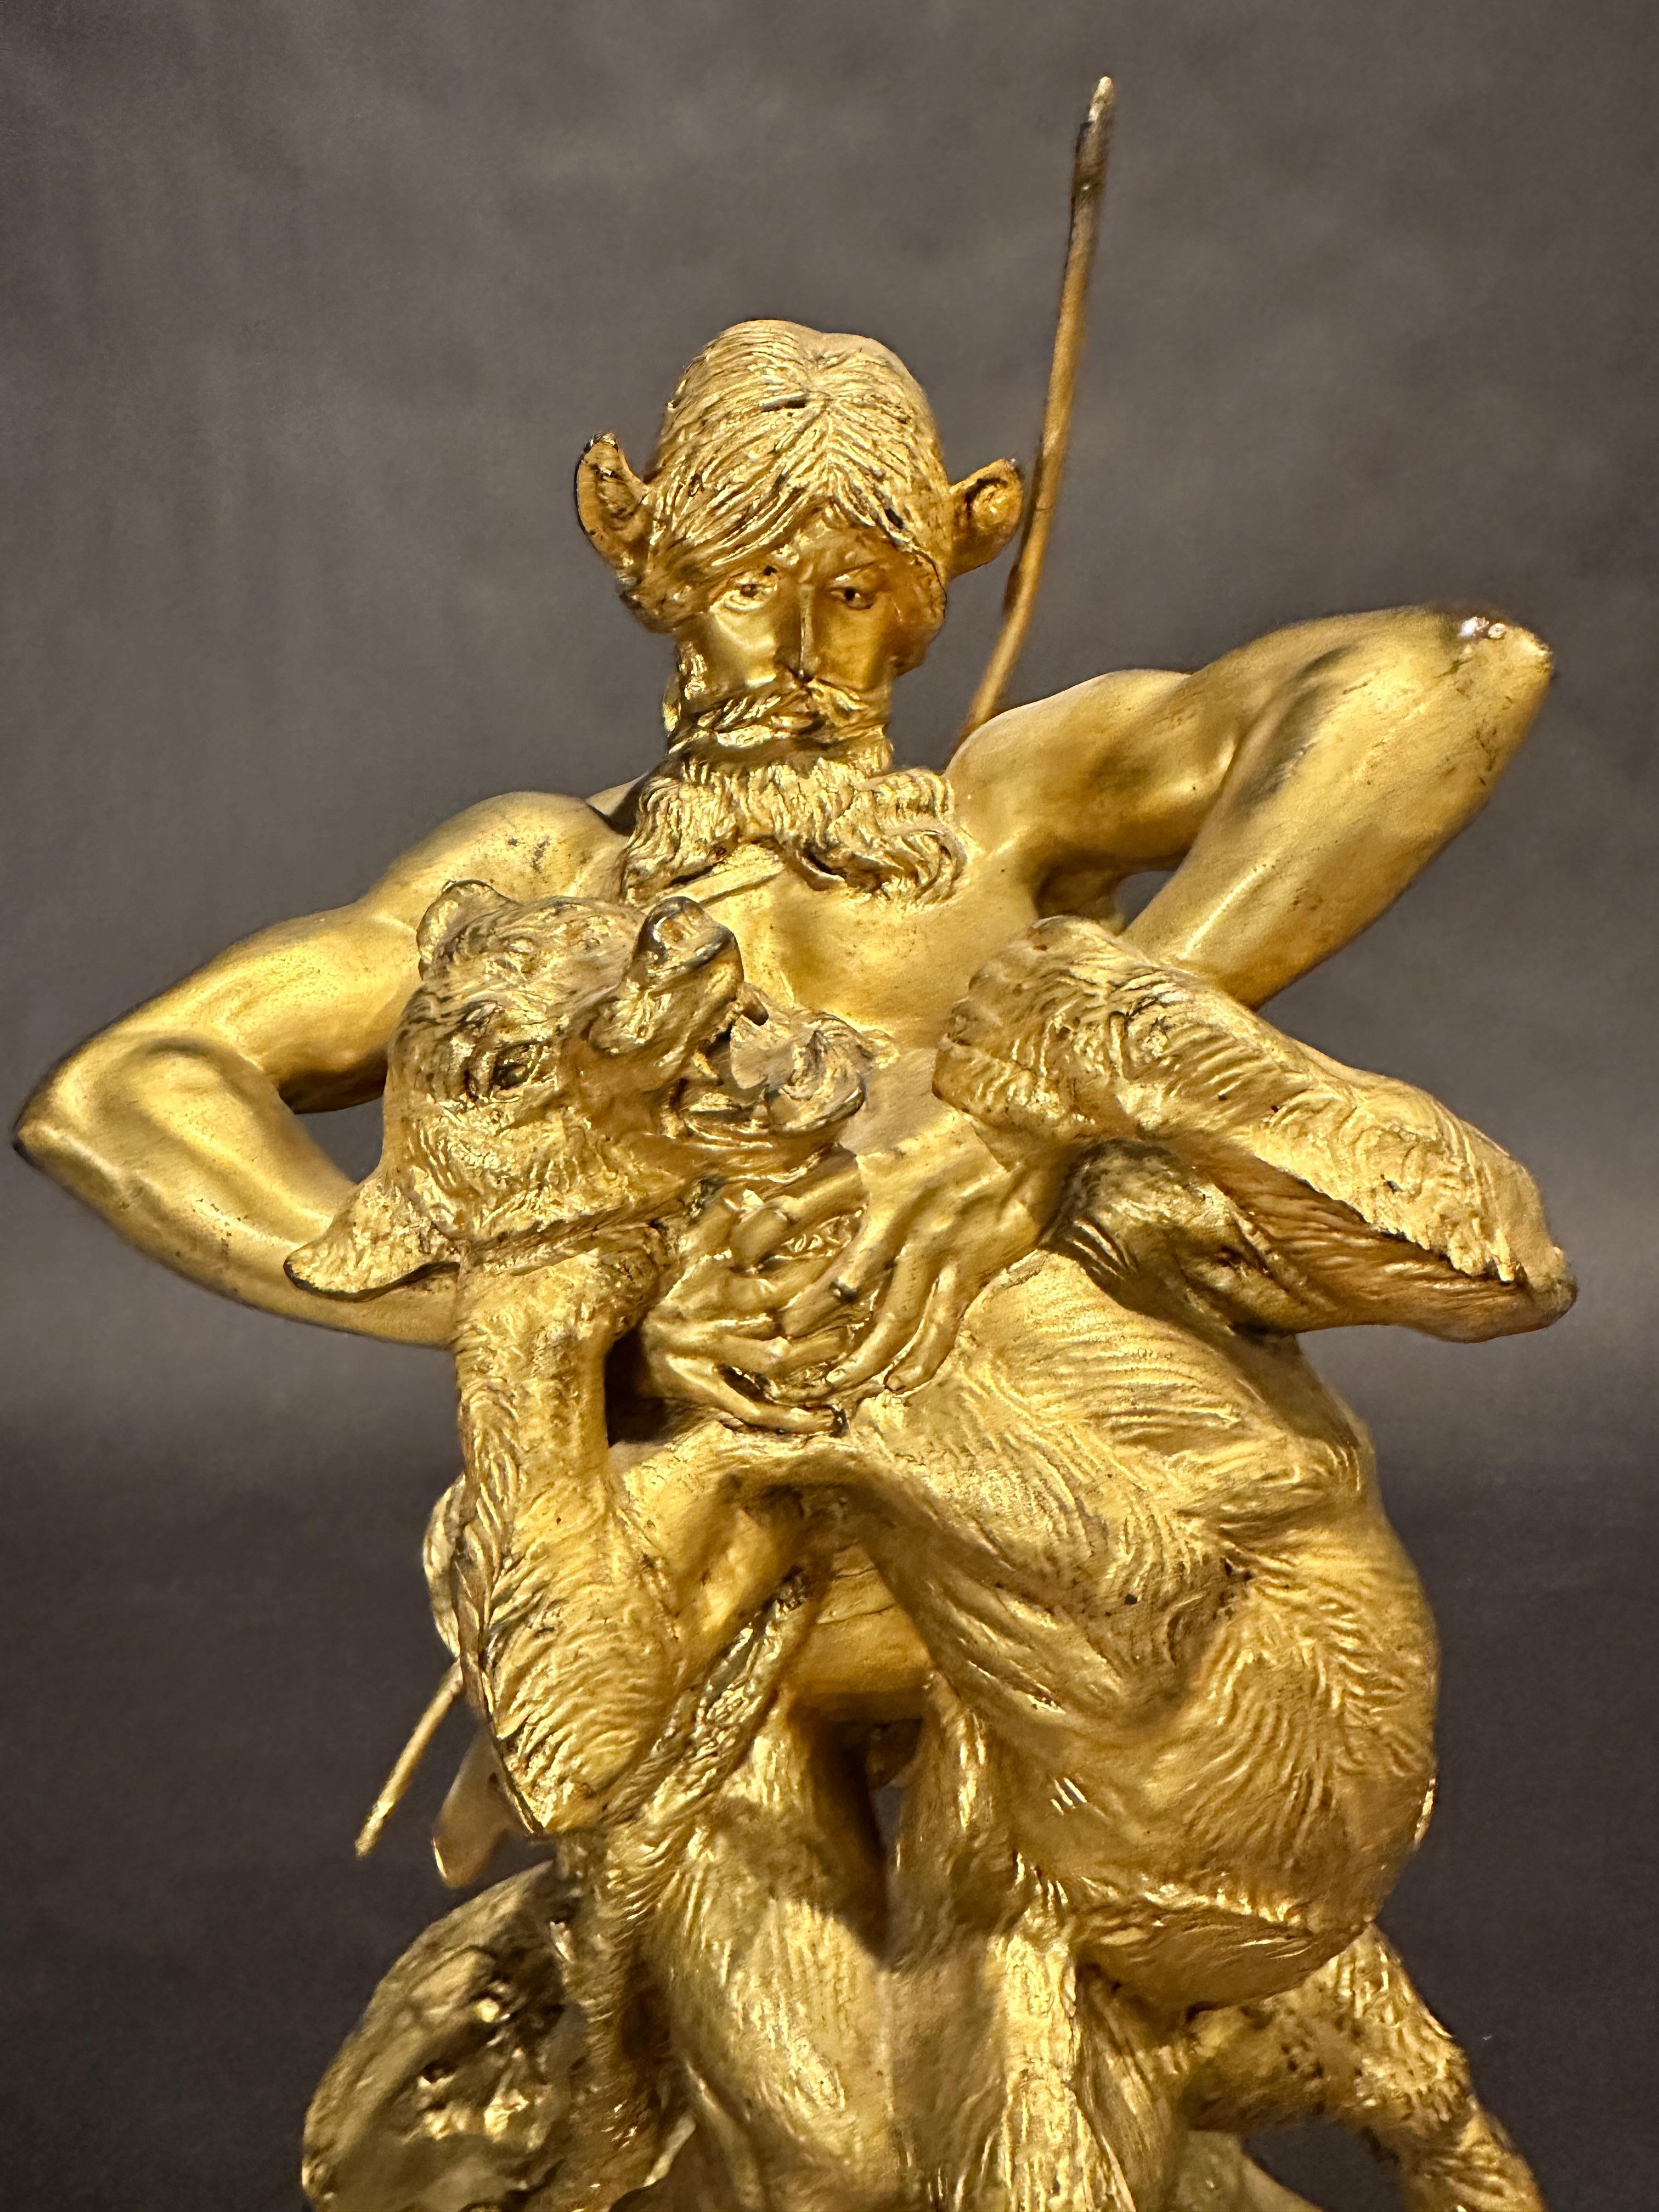 Rare Gilt Bronze Sculptural Group By Emmanuel Fremiet (1824 - 1910) In Good Condition For Sale In Norwood, NJ